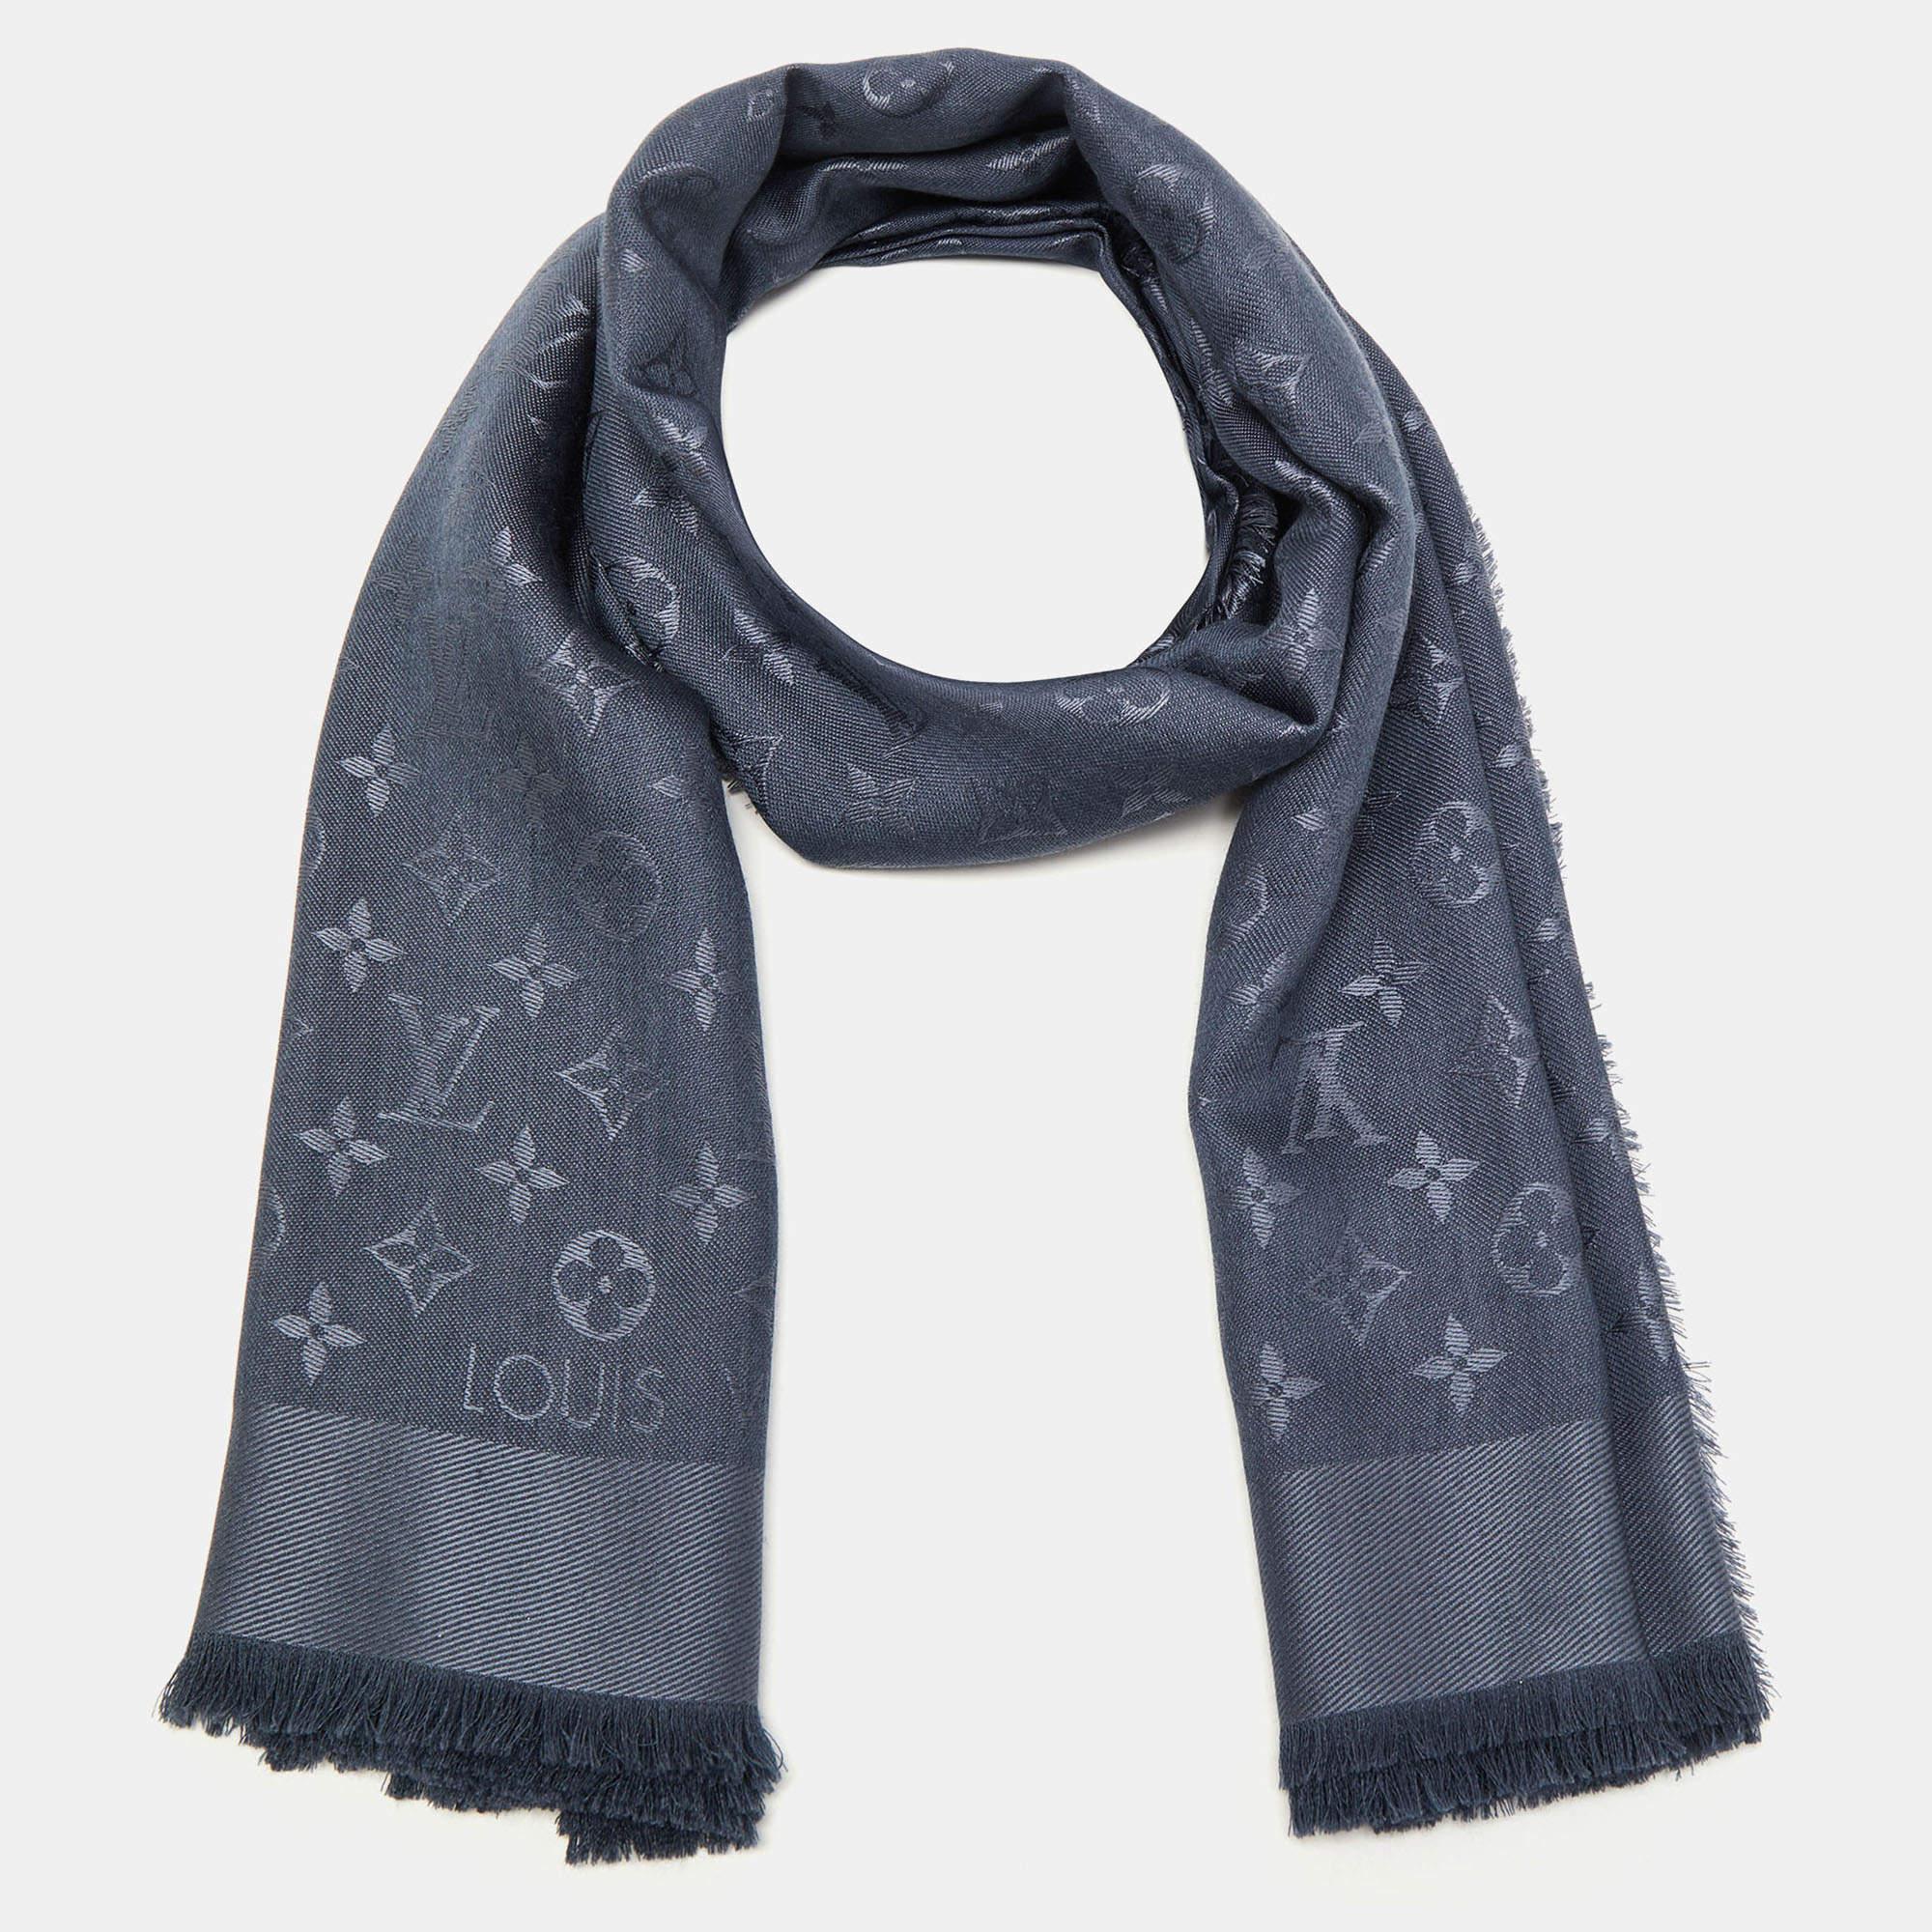 A shawl with fringes on the edges and LV's monogram pattern all over. This Louis Vuitton Logomania scarf made in Italy brings a soft feel and timeless appeal. Wrap it around your neck, and shoulders or style it with your coats and jackets.

